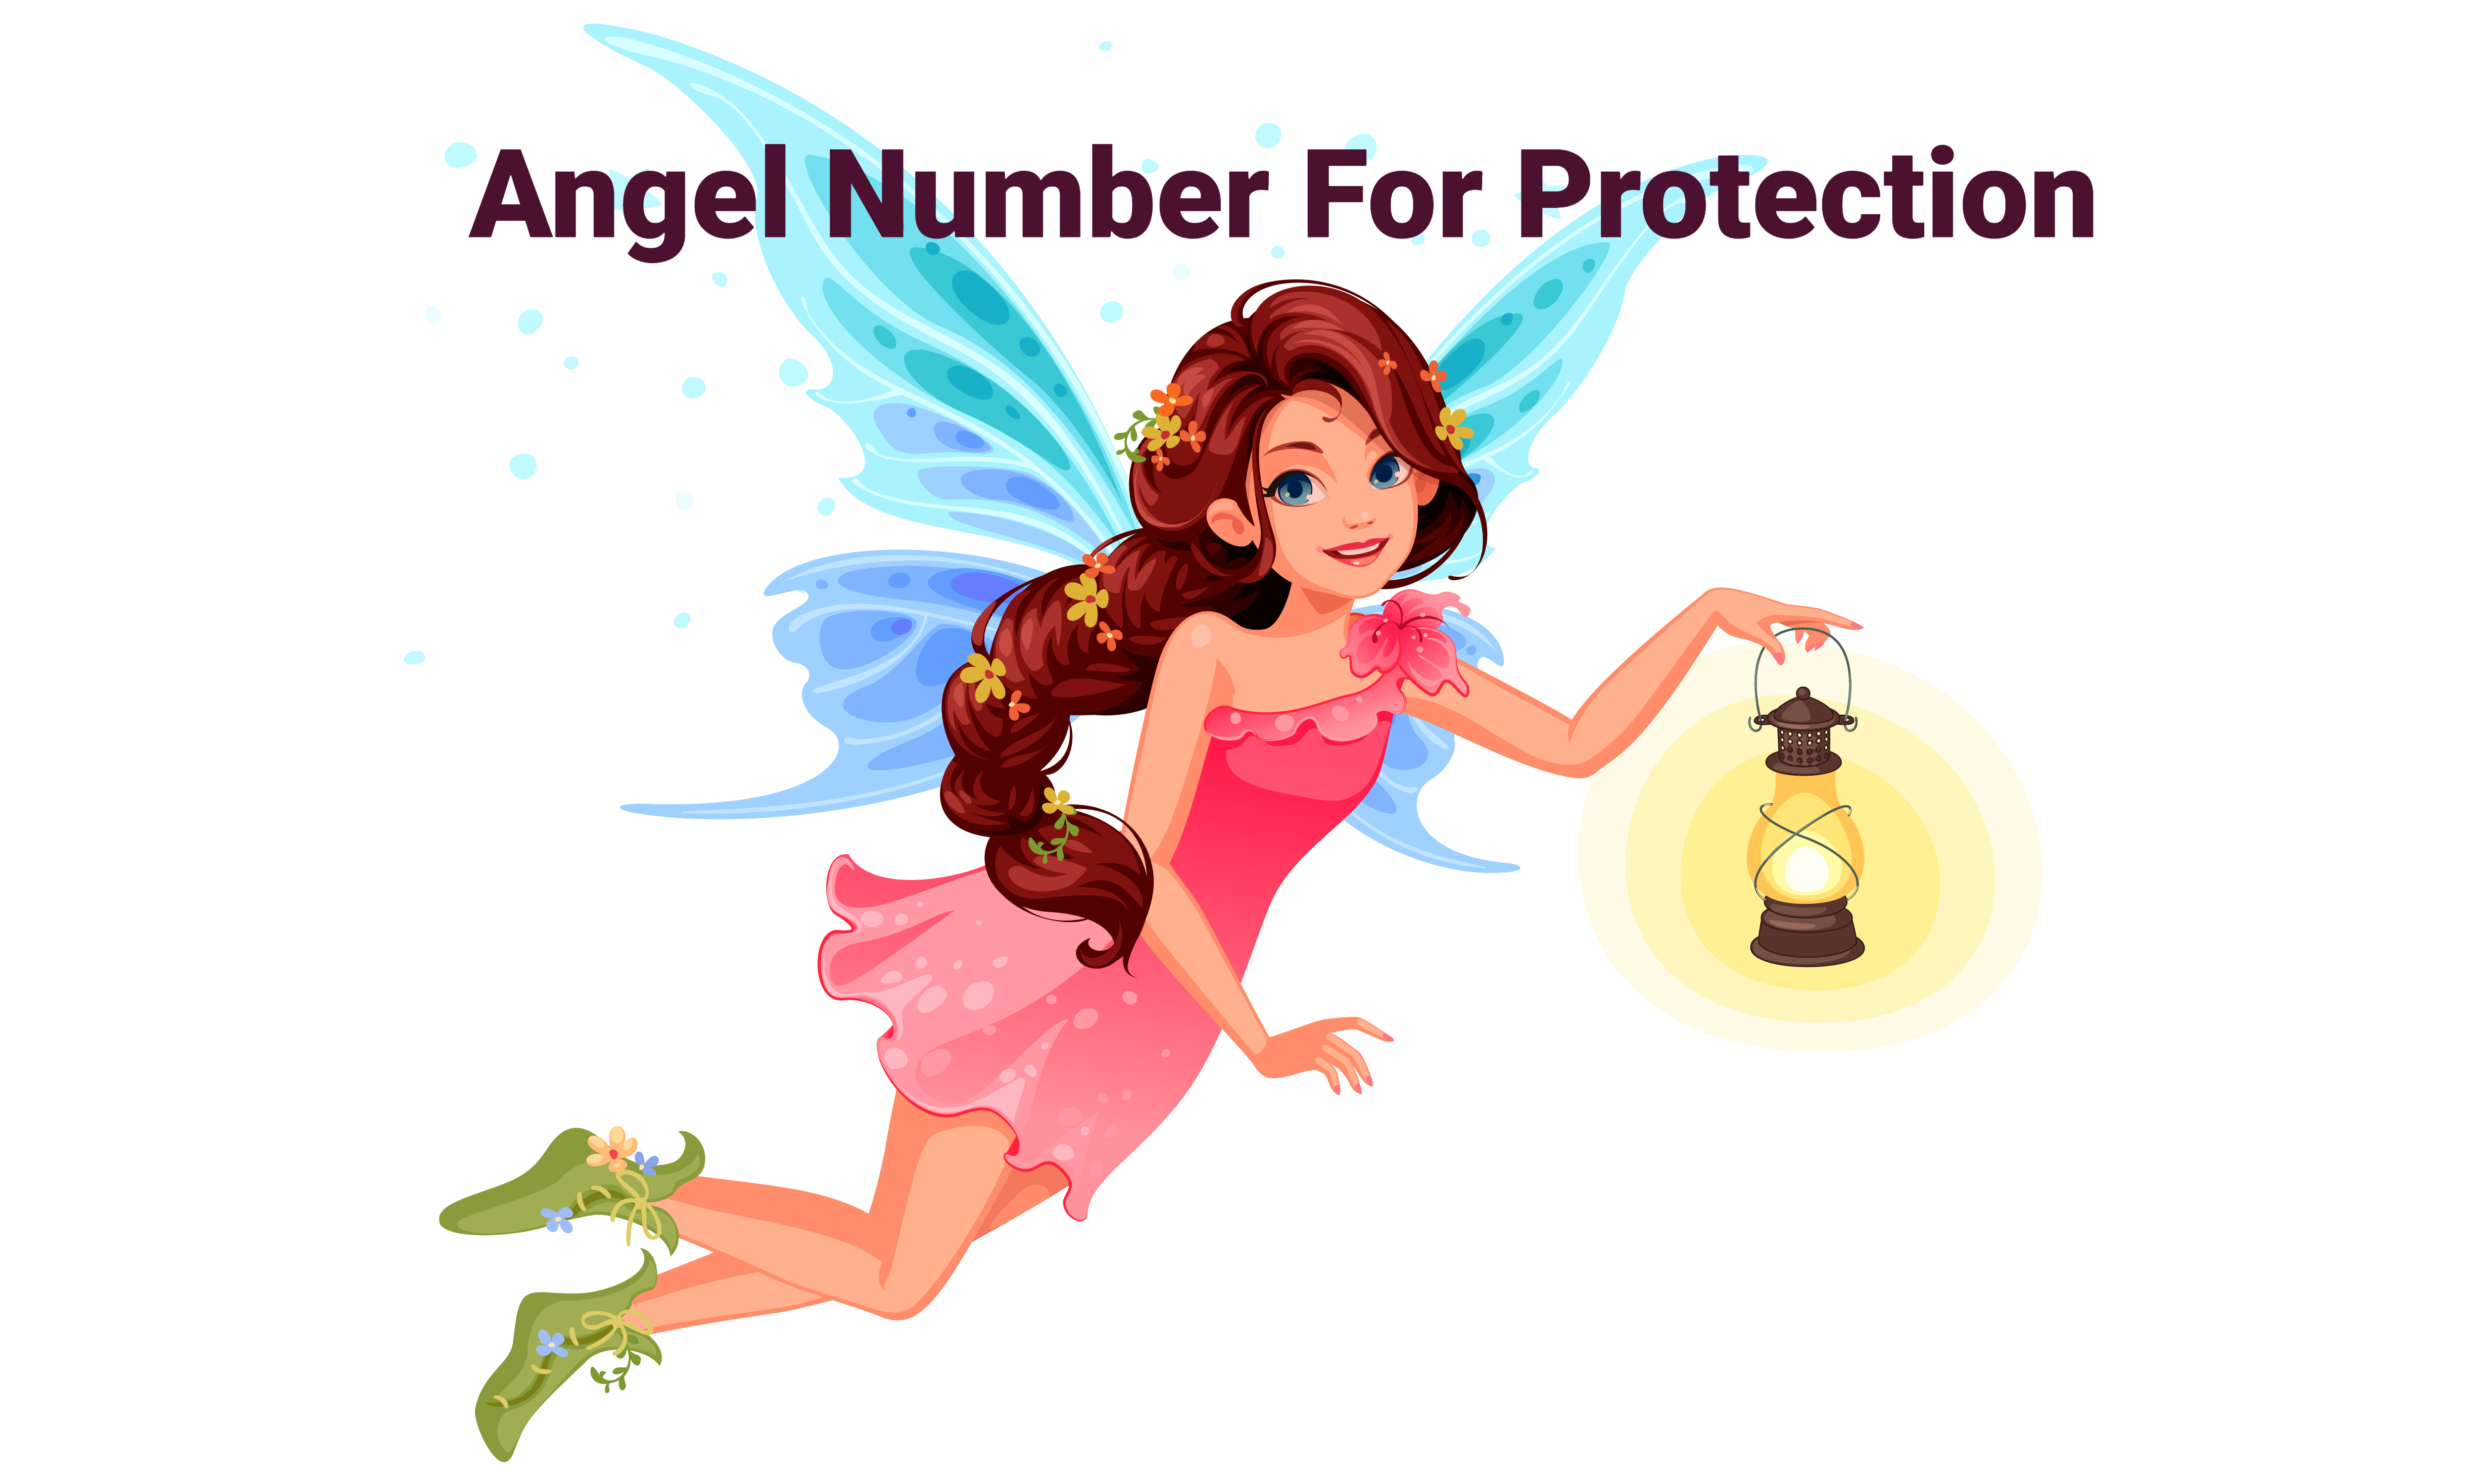 Angel Number For Protection - How To Interpret And Understand